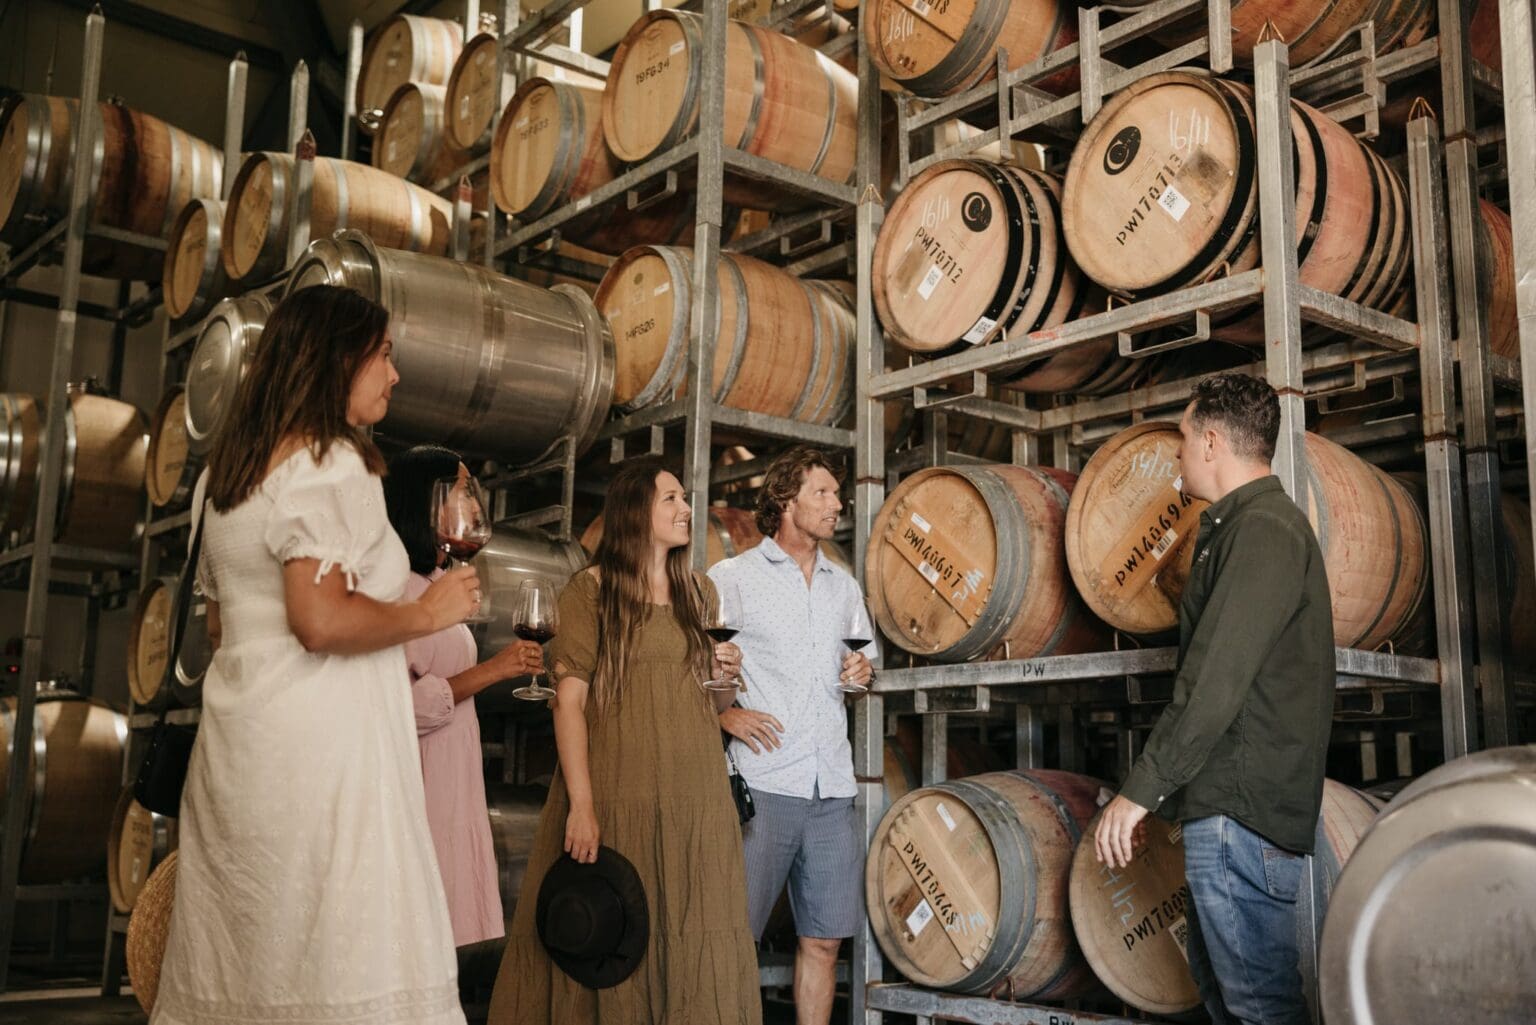 A group of people with barrels of wine surrounding them.